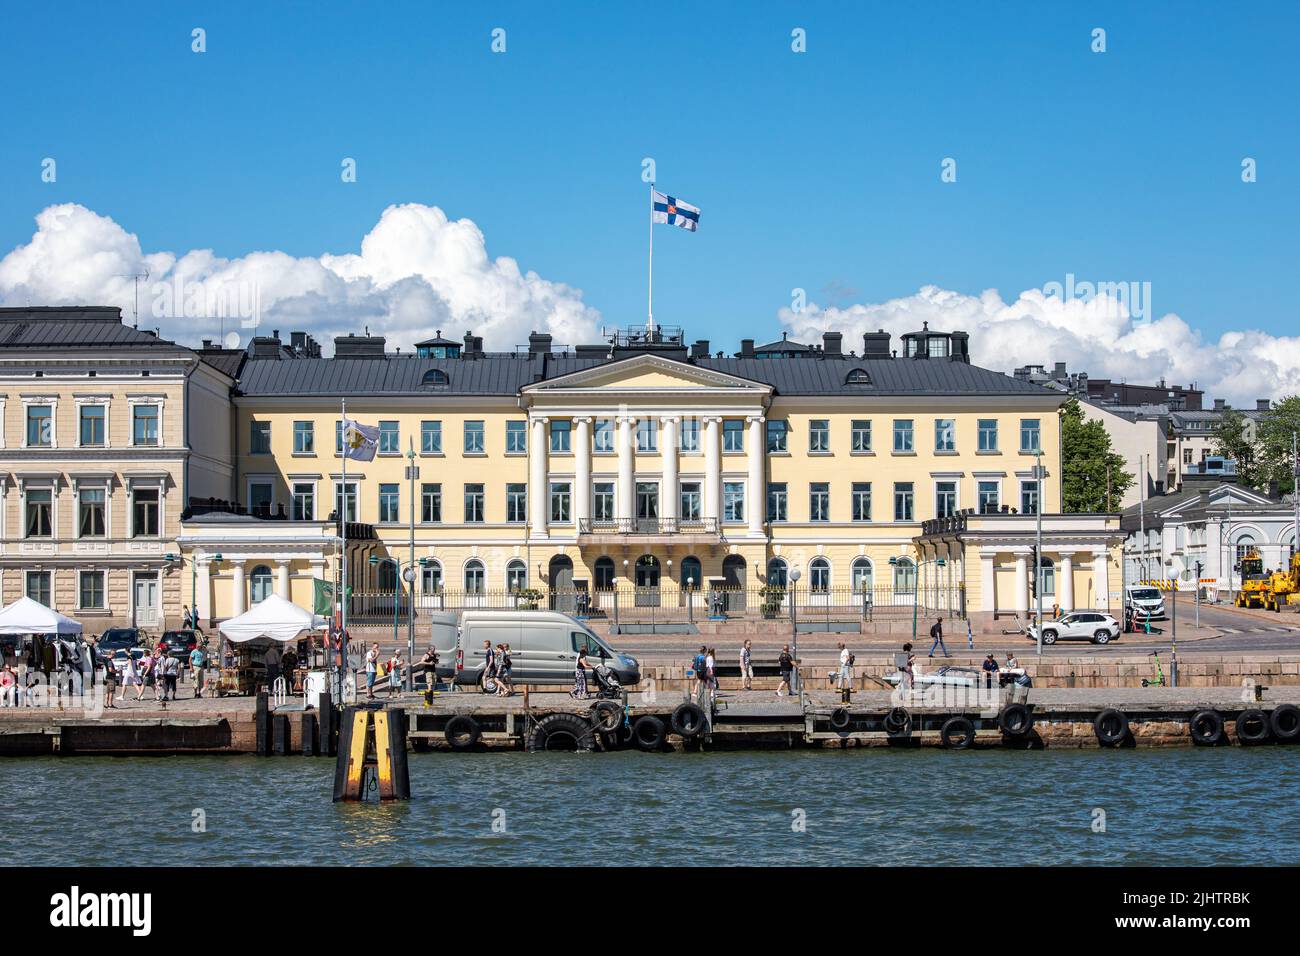 Presidentin linna or Presidential Palace, the official residence of the President of Finland Stock Photo